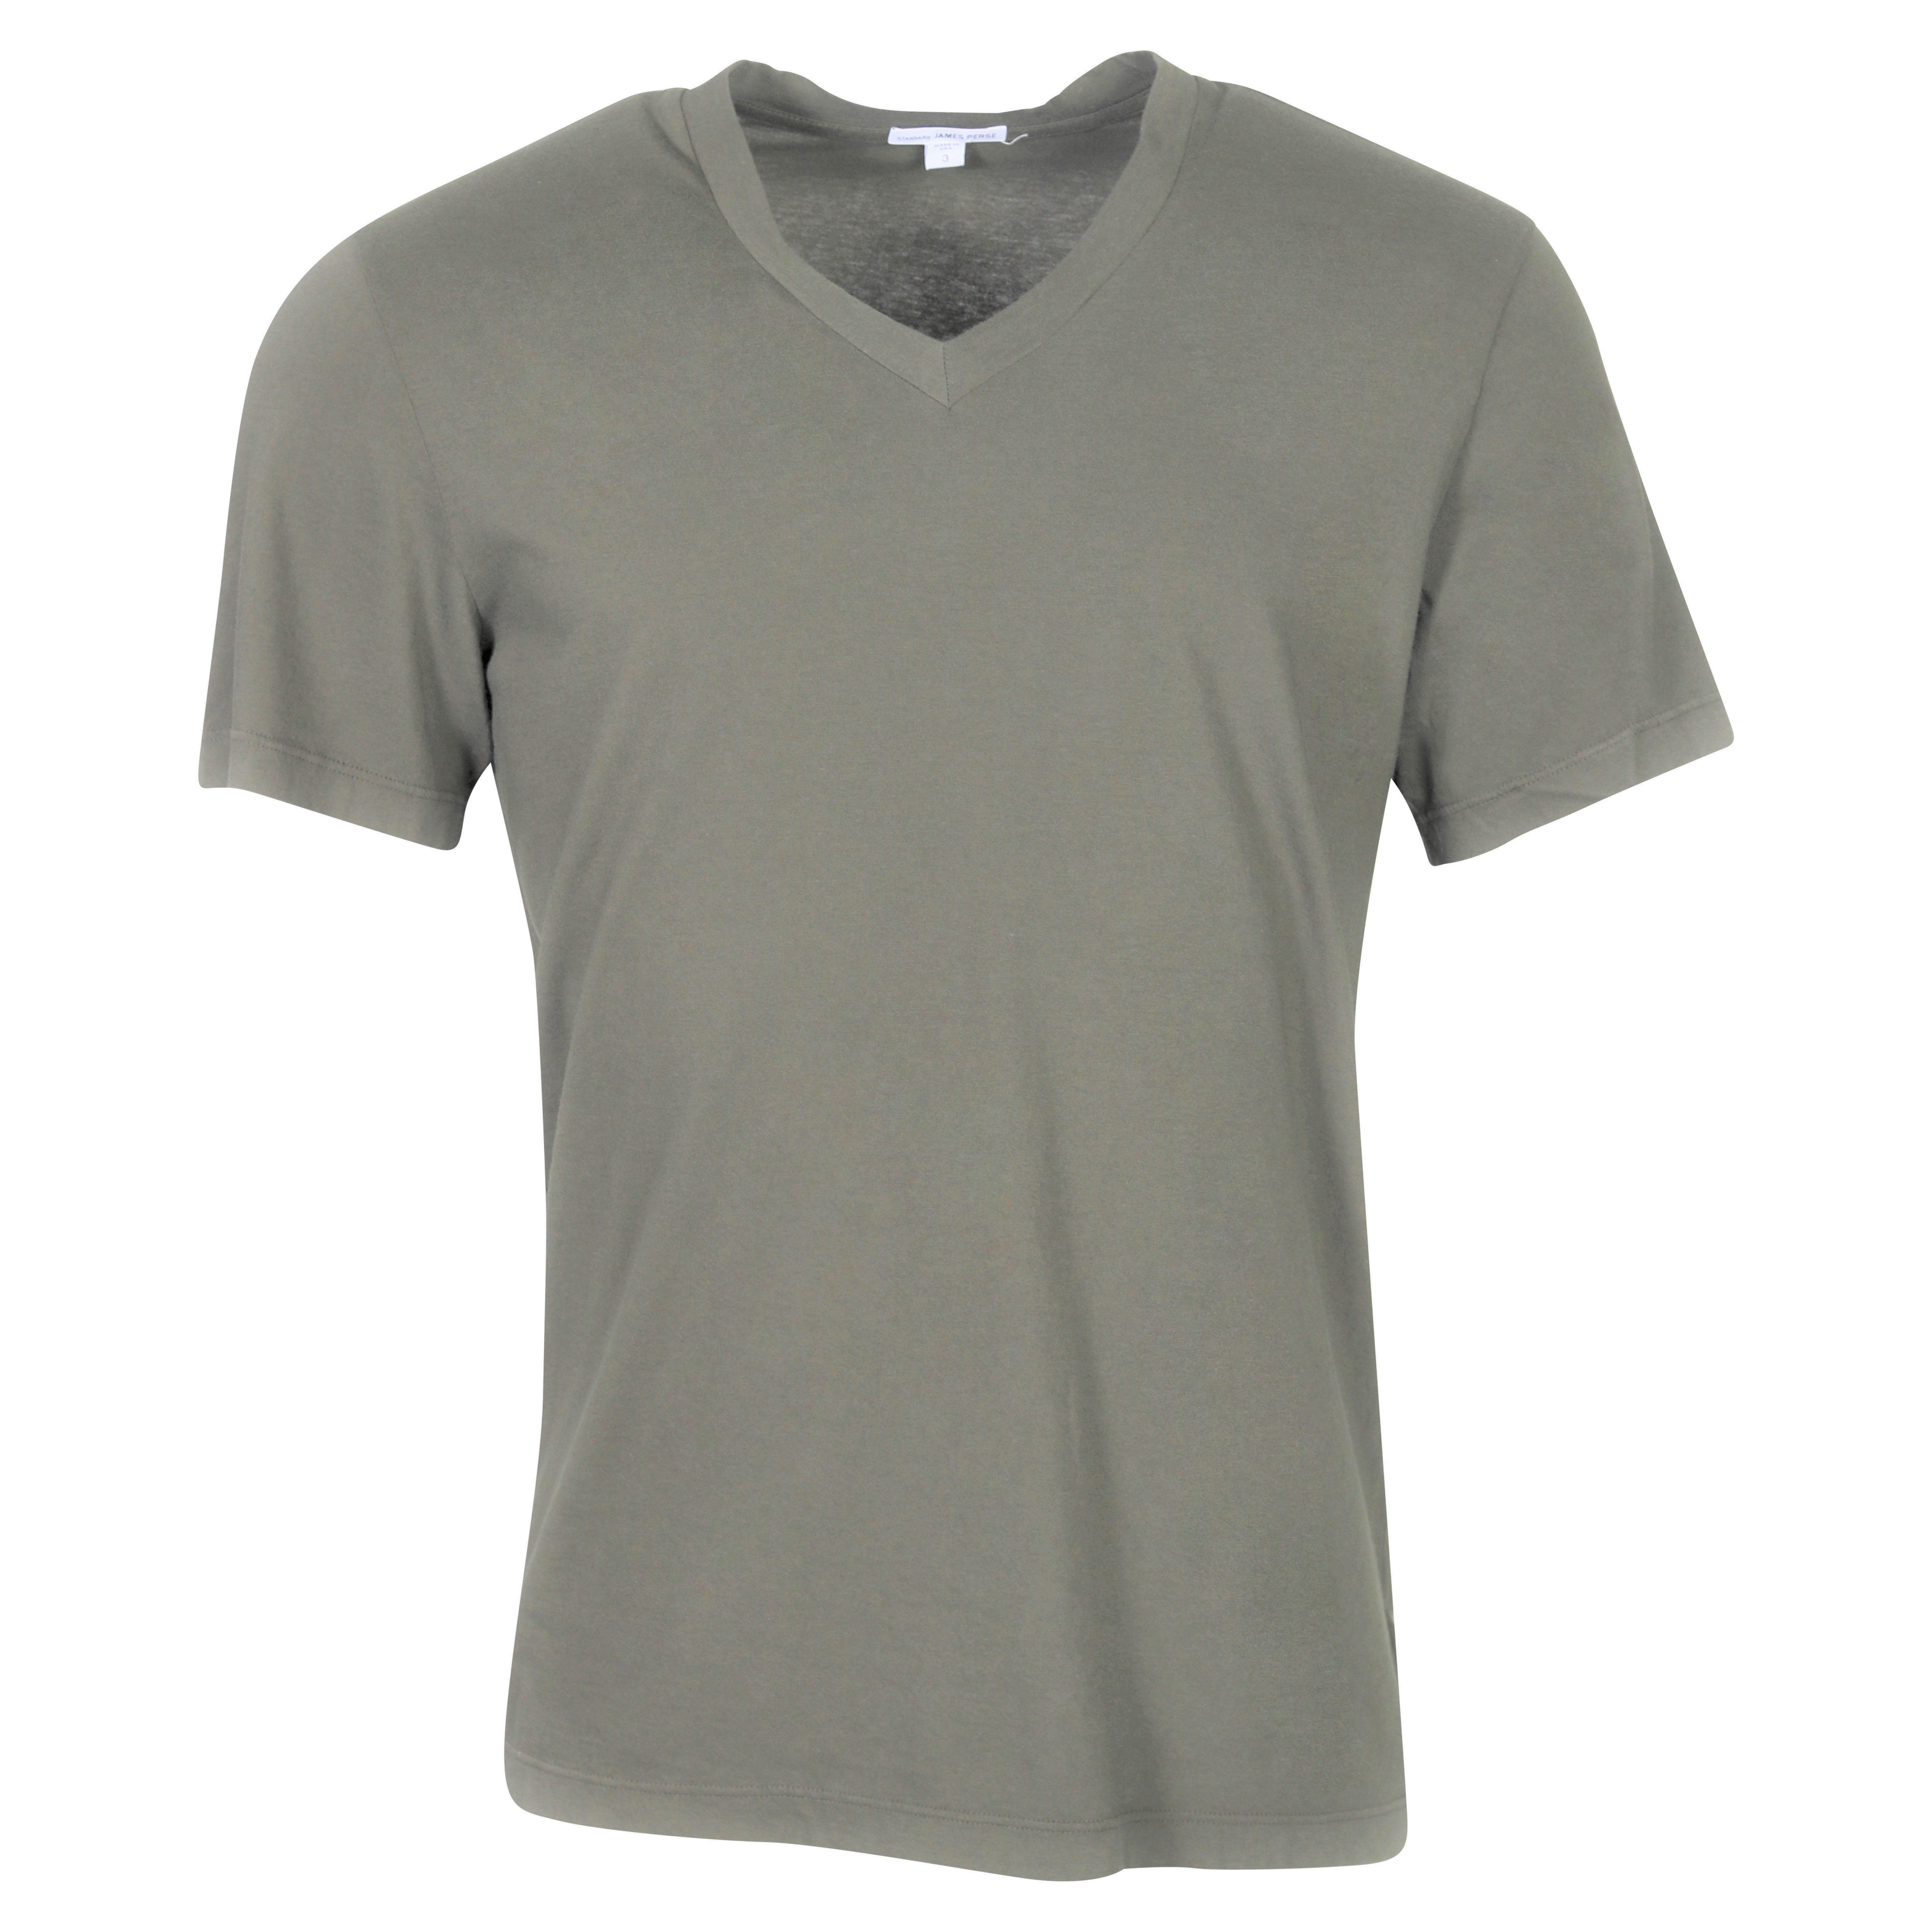 James Perse T-Shirt V-Neck in Jungle M